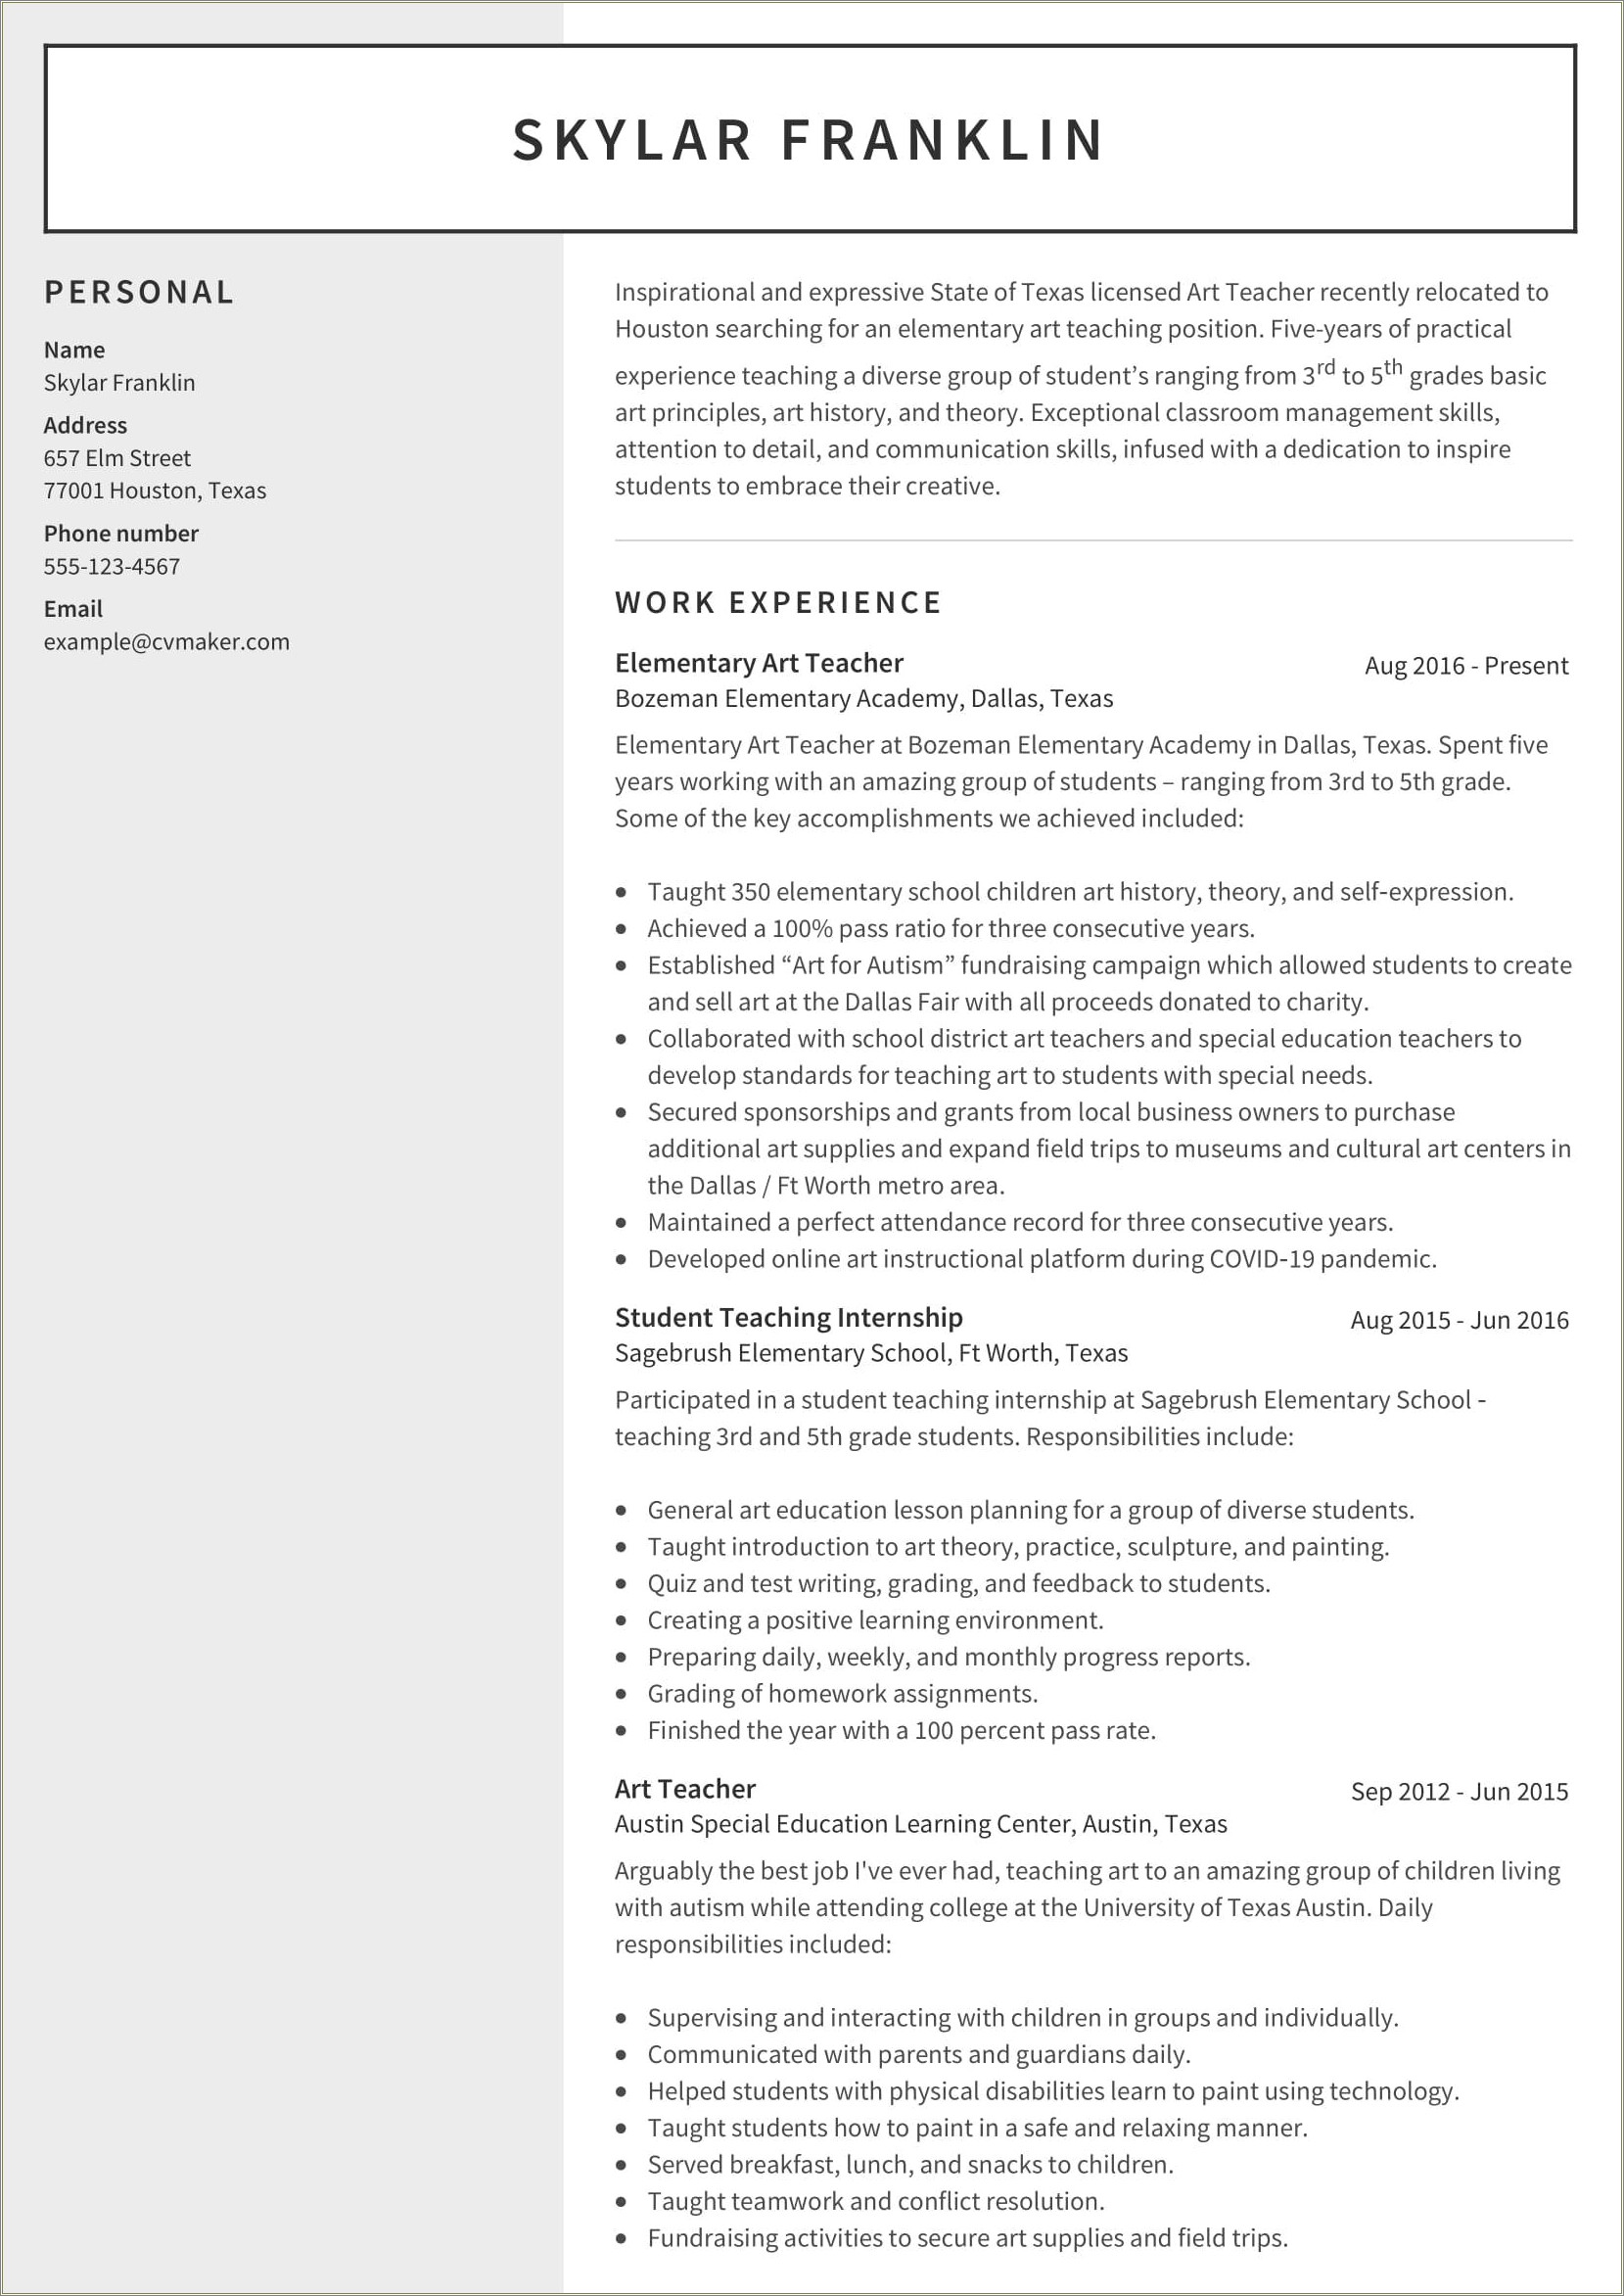 Sample Resume For Admission To Art Schools